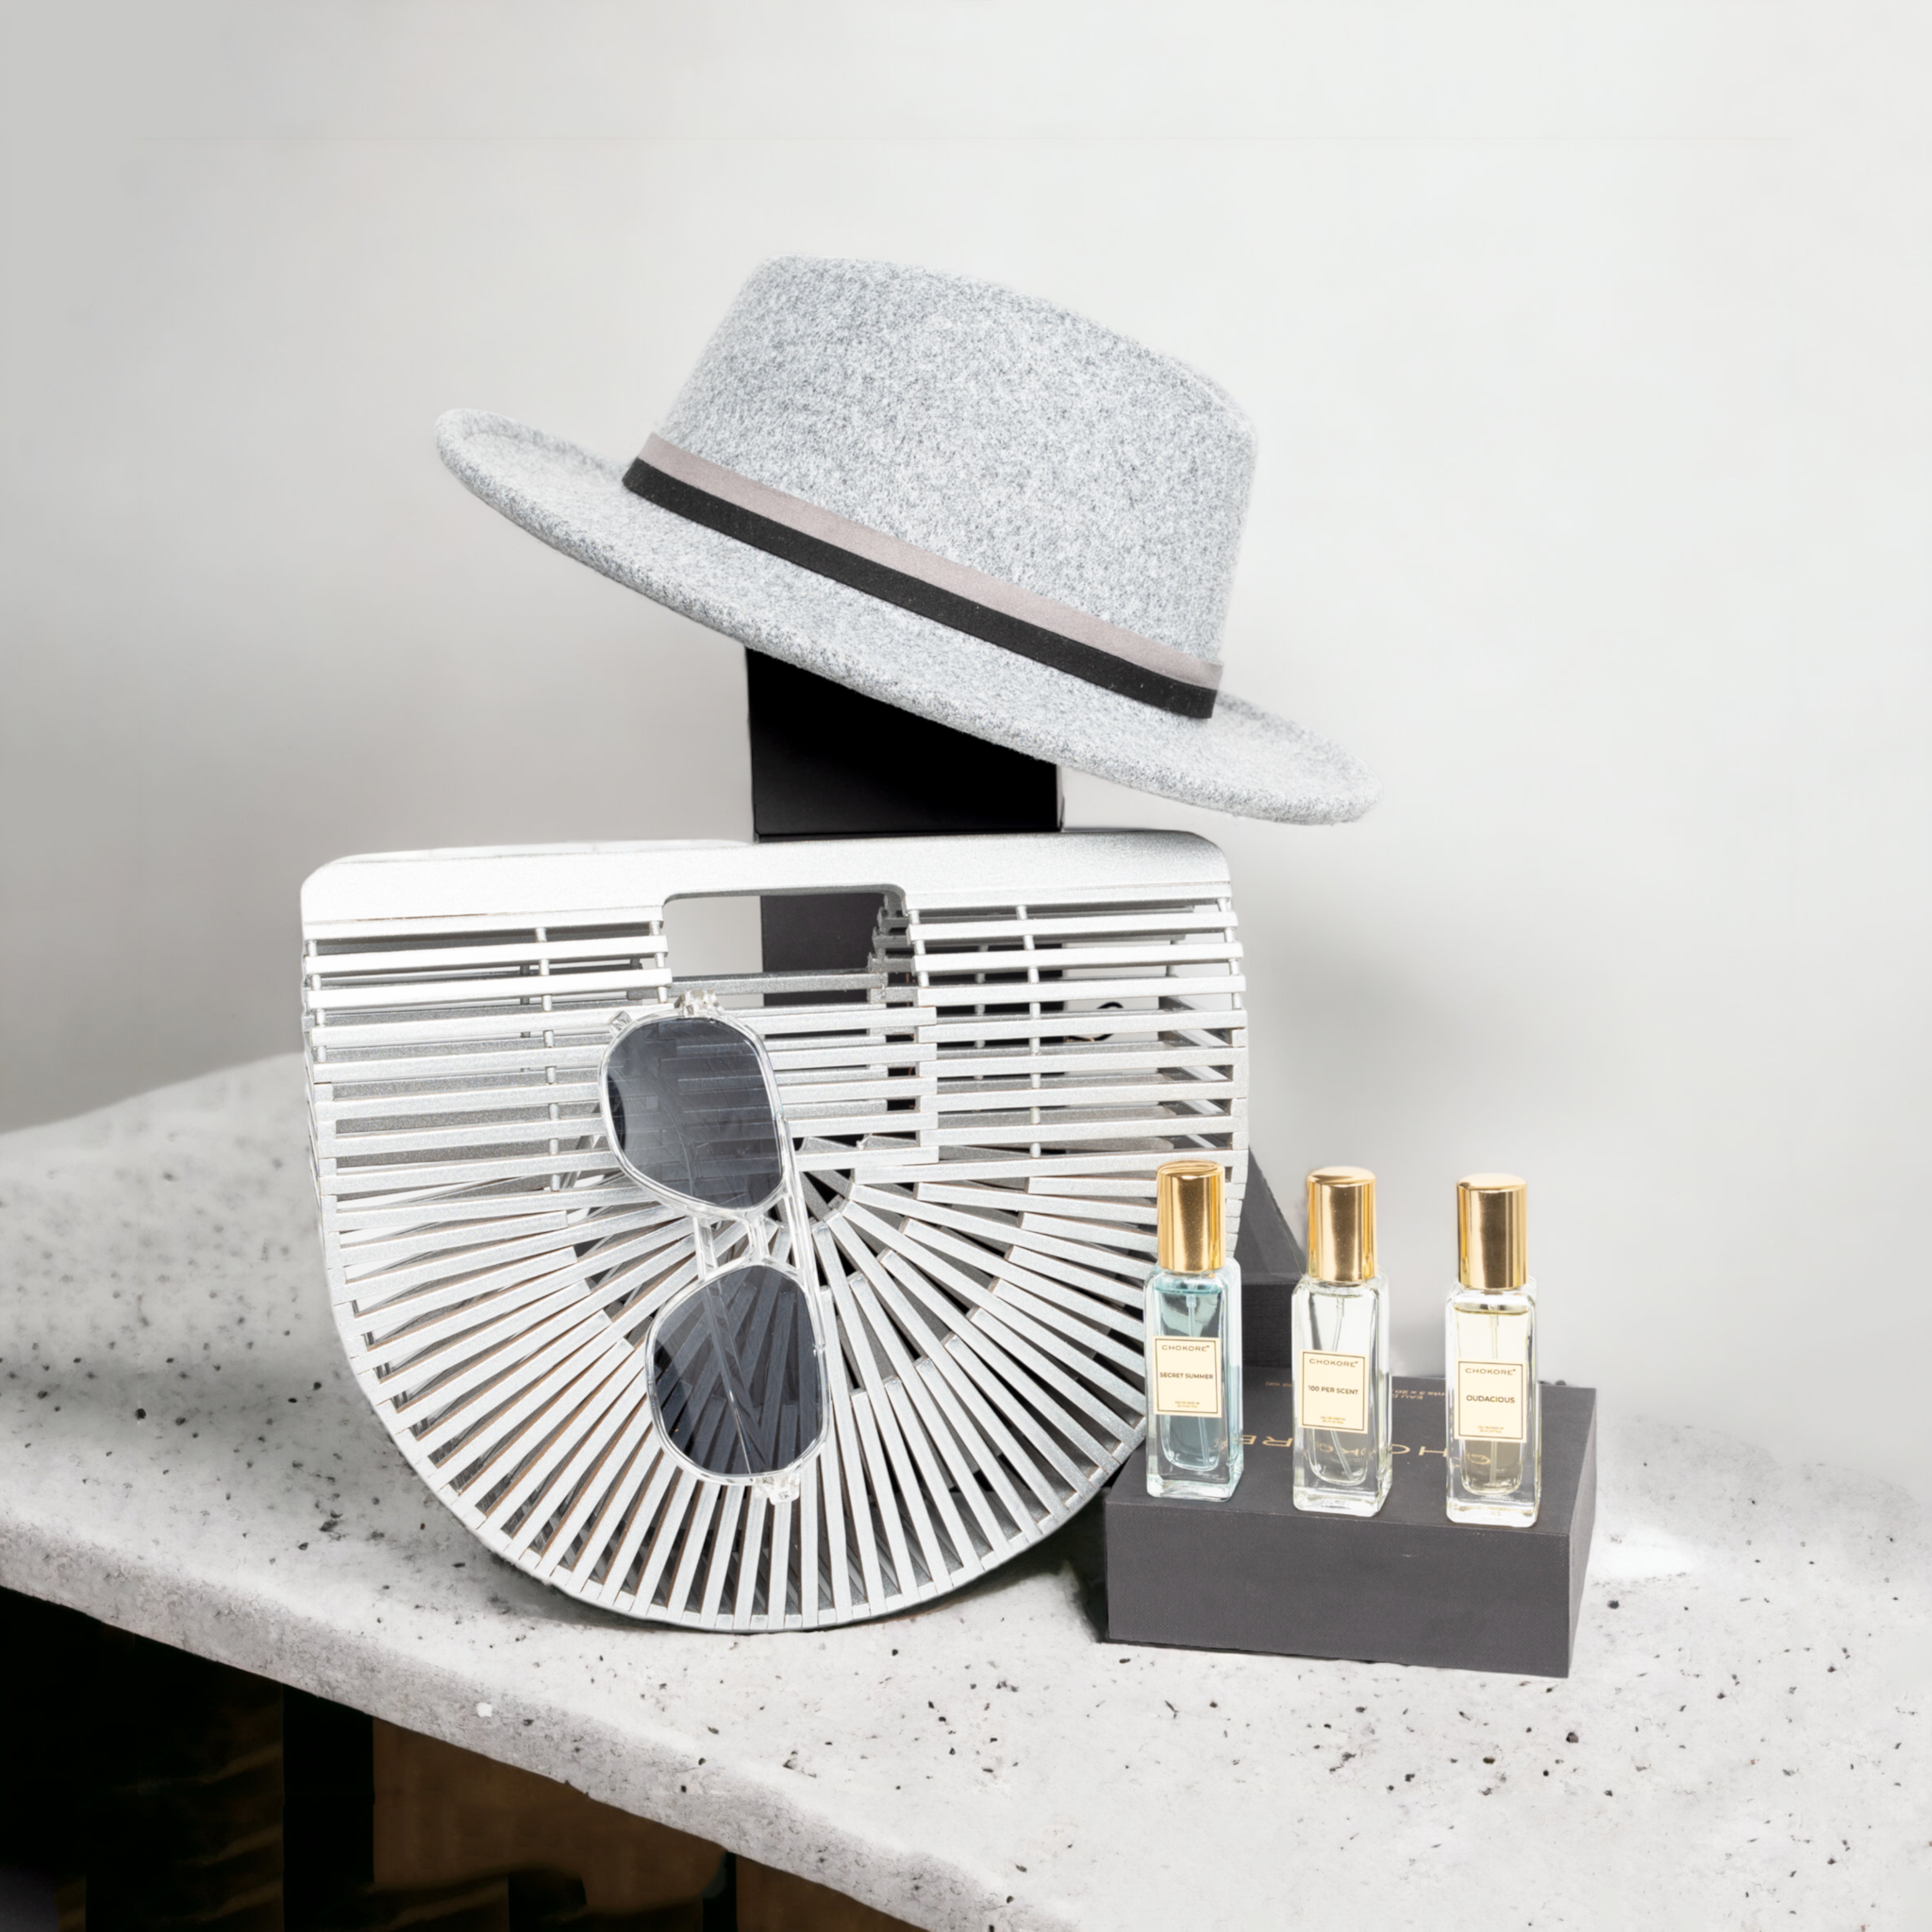 Chokore Special 4-in-1 Gift Set for Him & Her (Fedora Hat, Bamboo bag, Sunglasses, & Perfumes Combo)